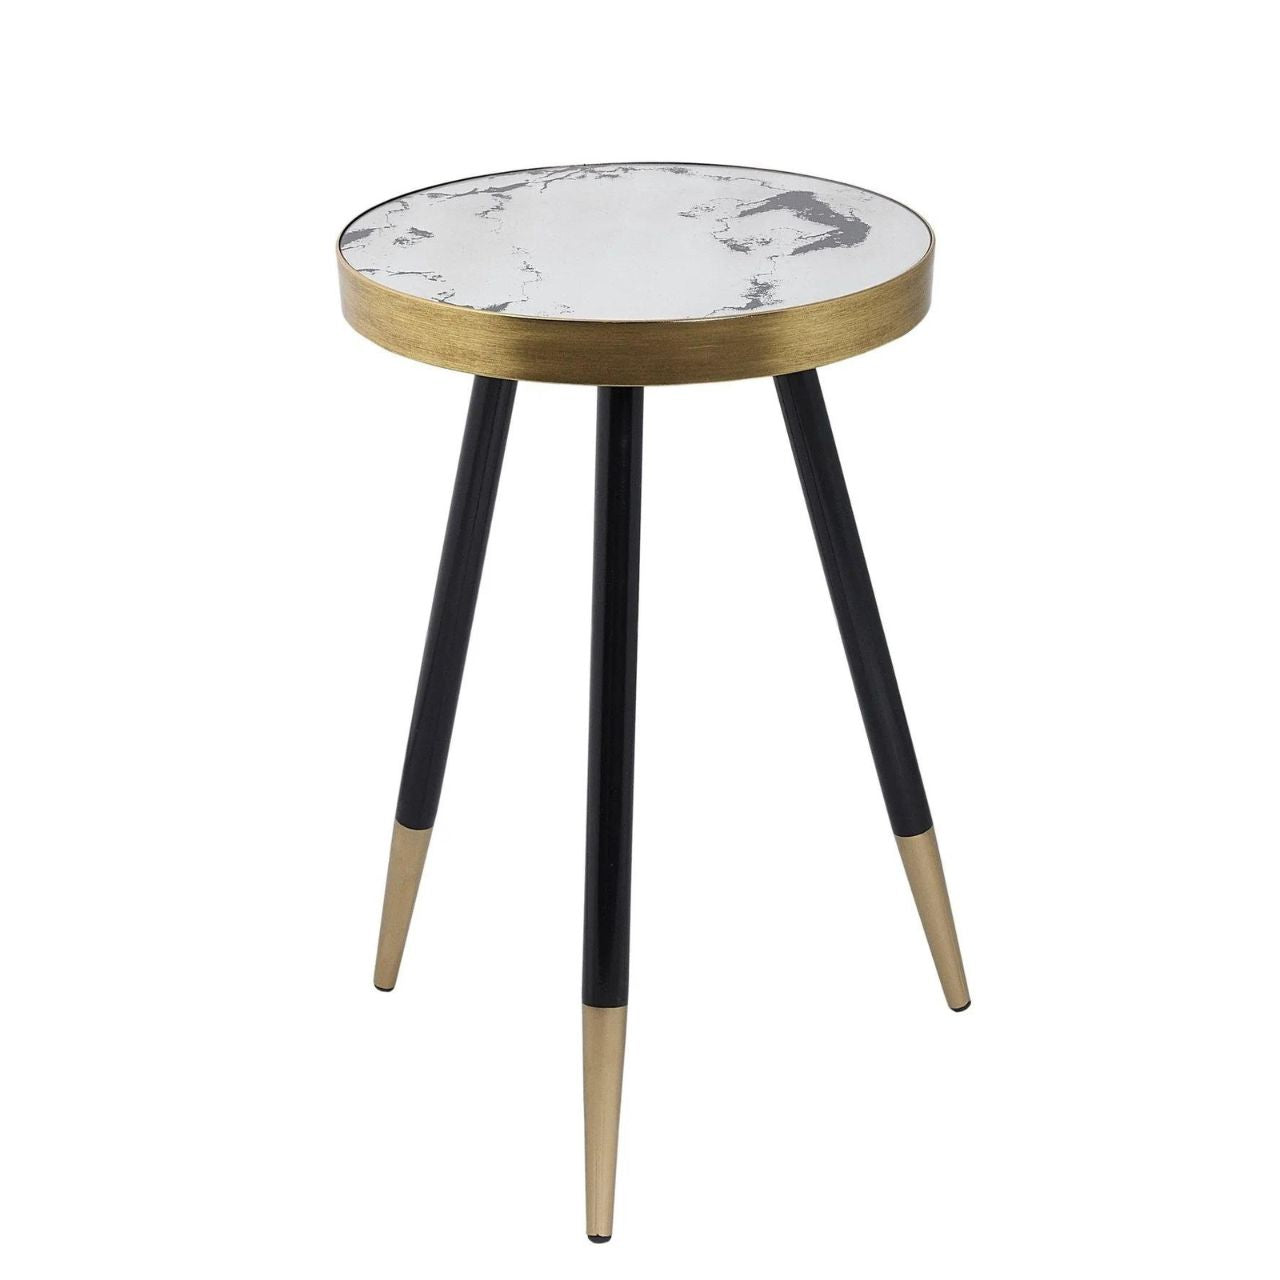 Mindy Brownes Vega Side Table  Black painted leg with gold tip and surround, 37cm diameter side table, mirrored top with distressed grey swirl patterned top. Can be styled solo or as part of a collaboration with the Palm, Bellatrix & Venus side tables for the ultimate styling effect.